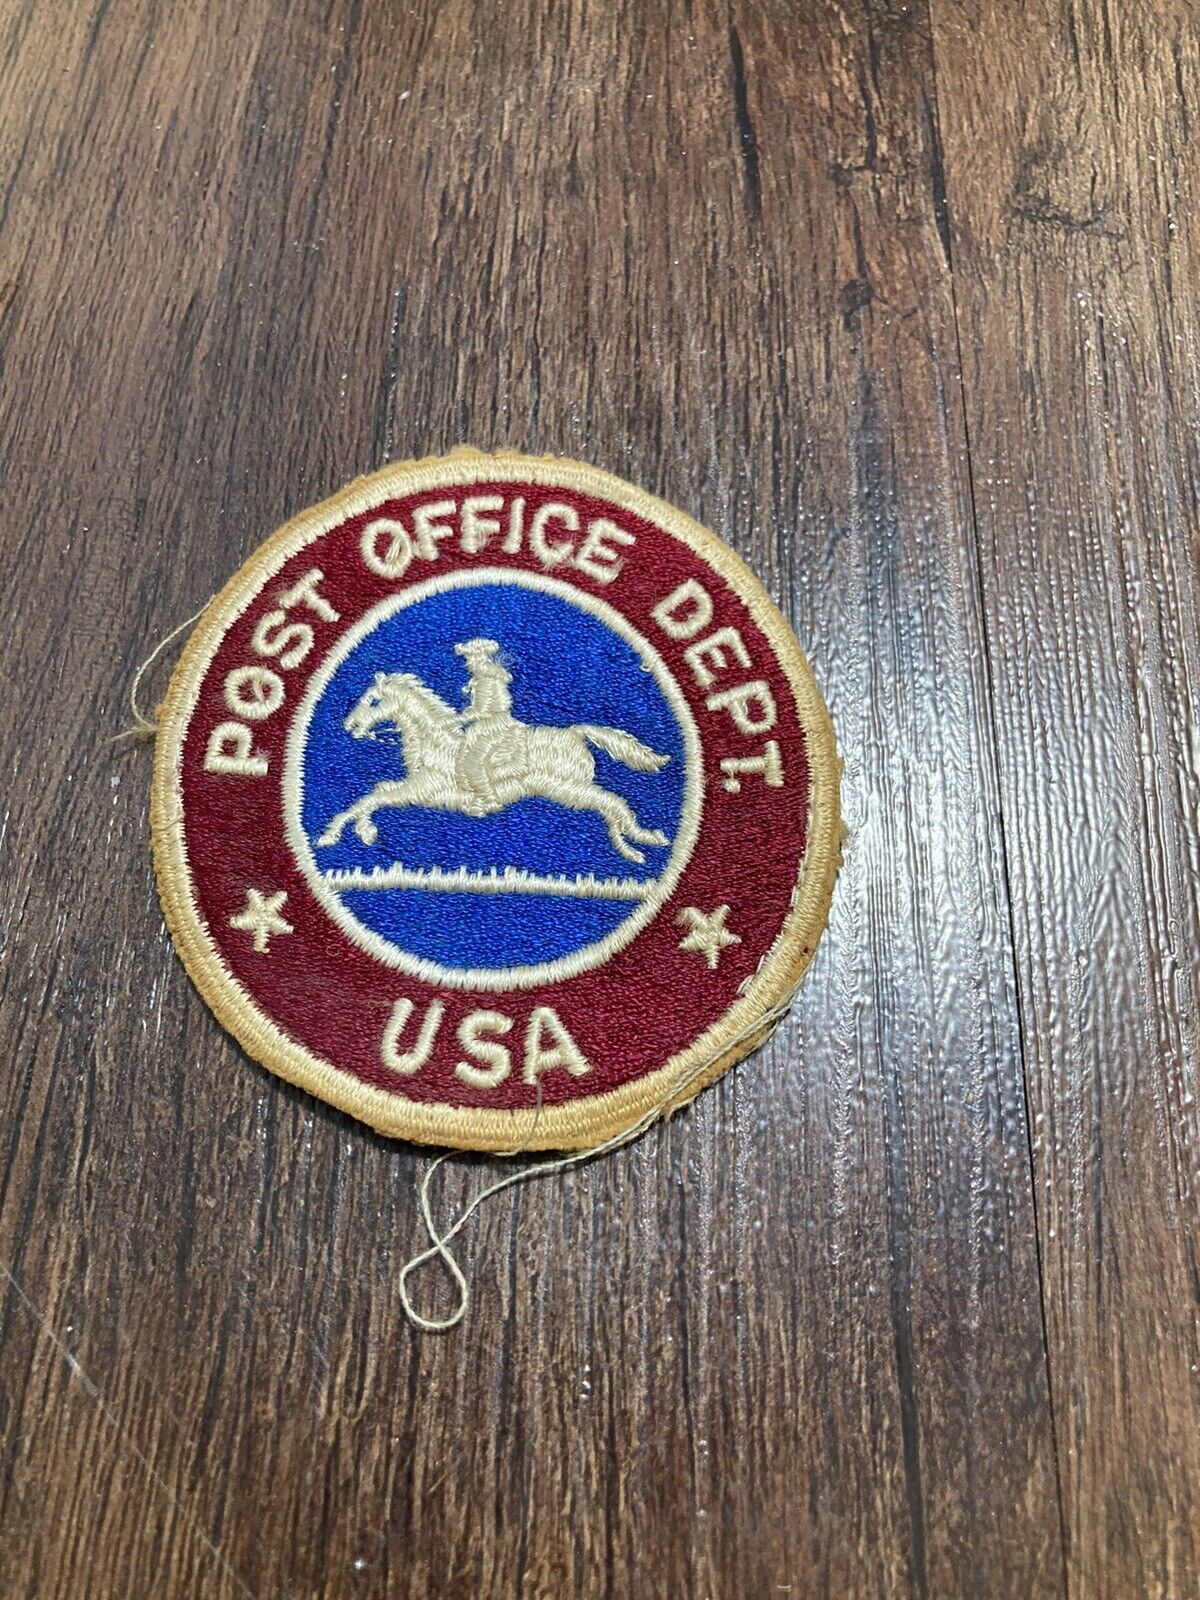 Vintage 1960’s United States Post Office Department USA Uniform Patch